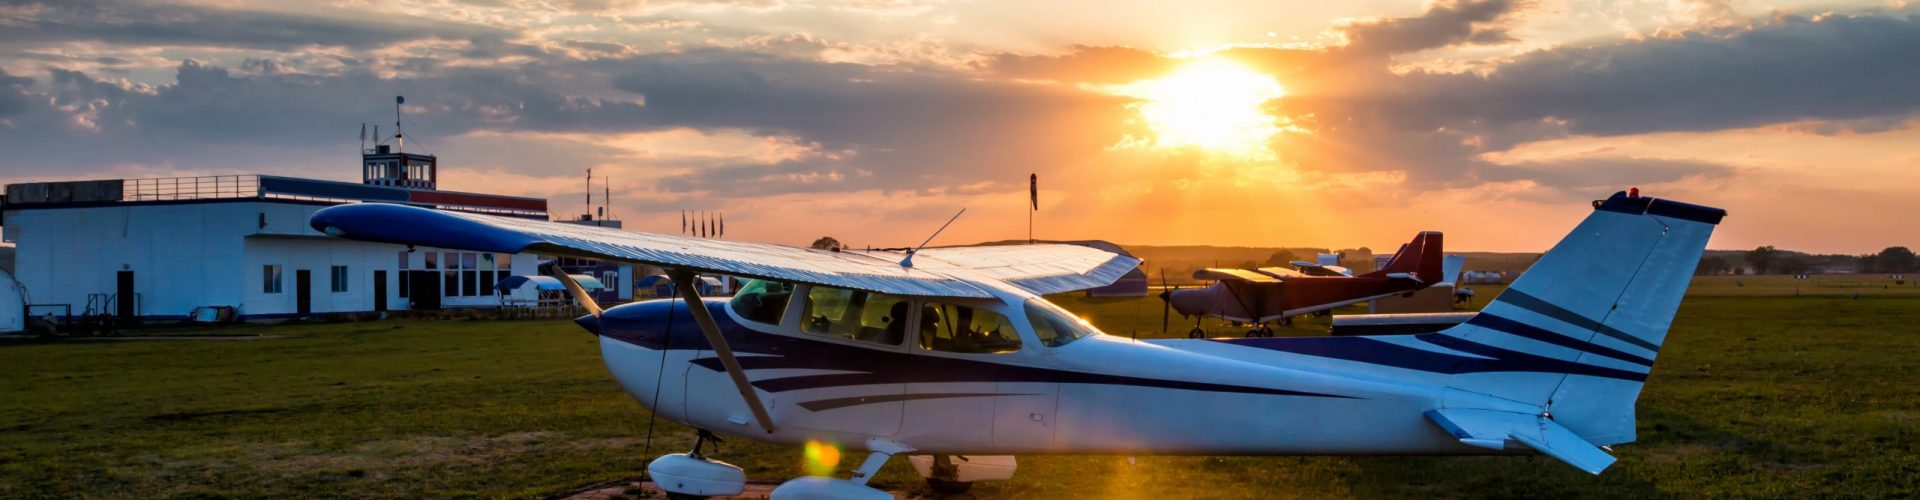 Small private airplanes on the airfield against the backdrop of a colorful sunset